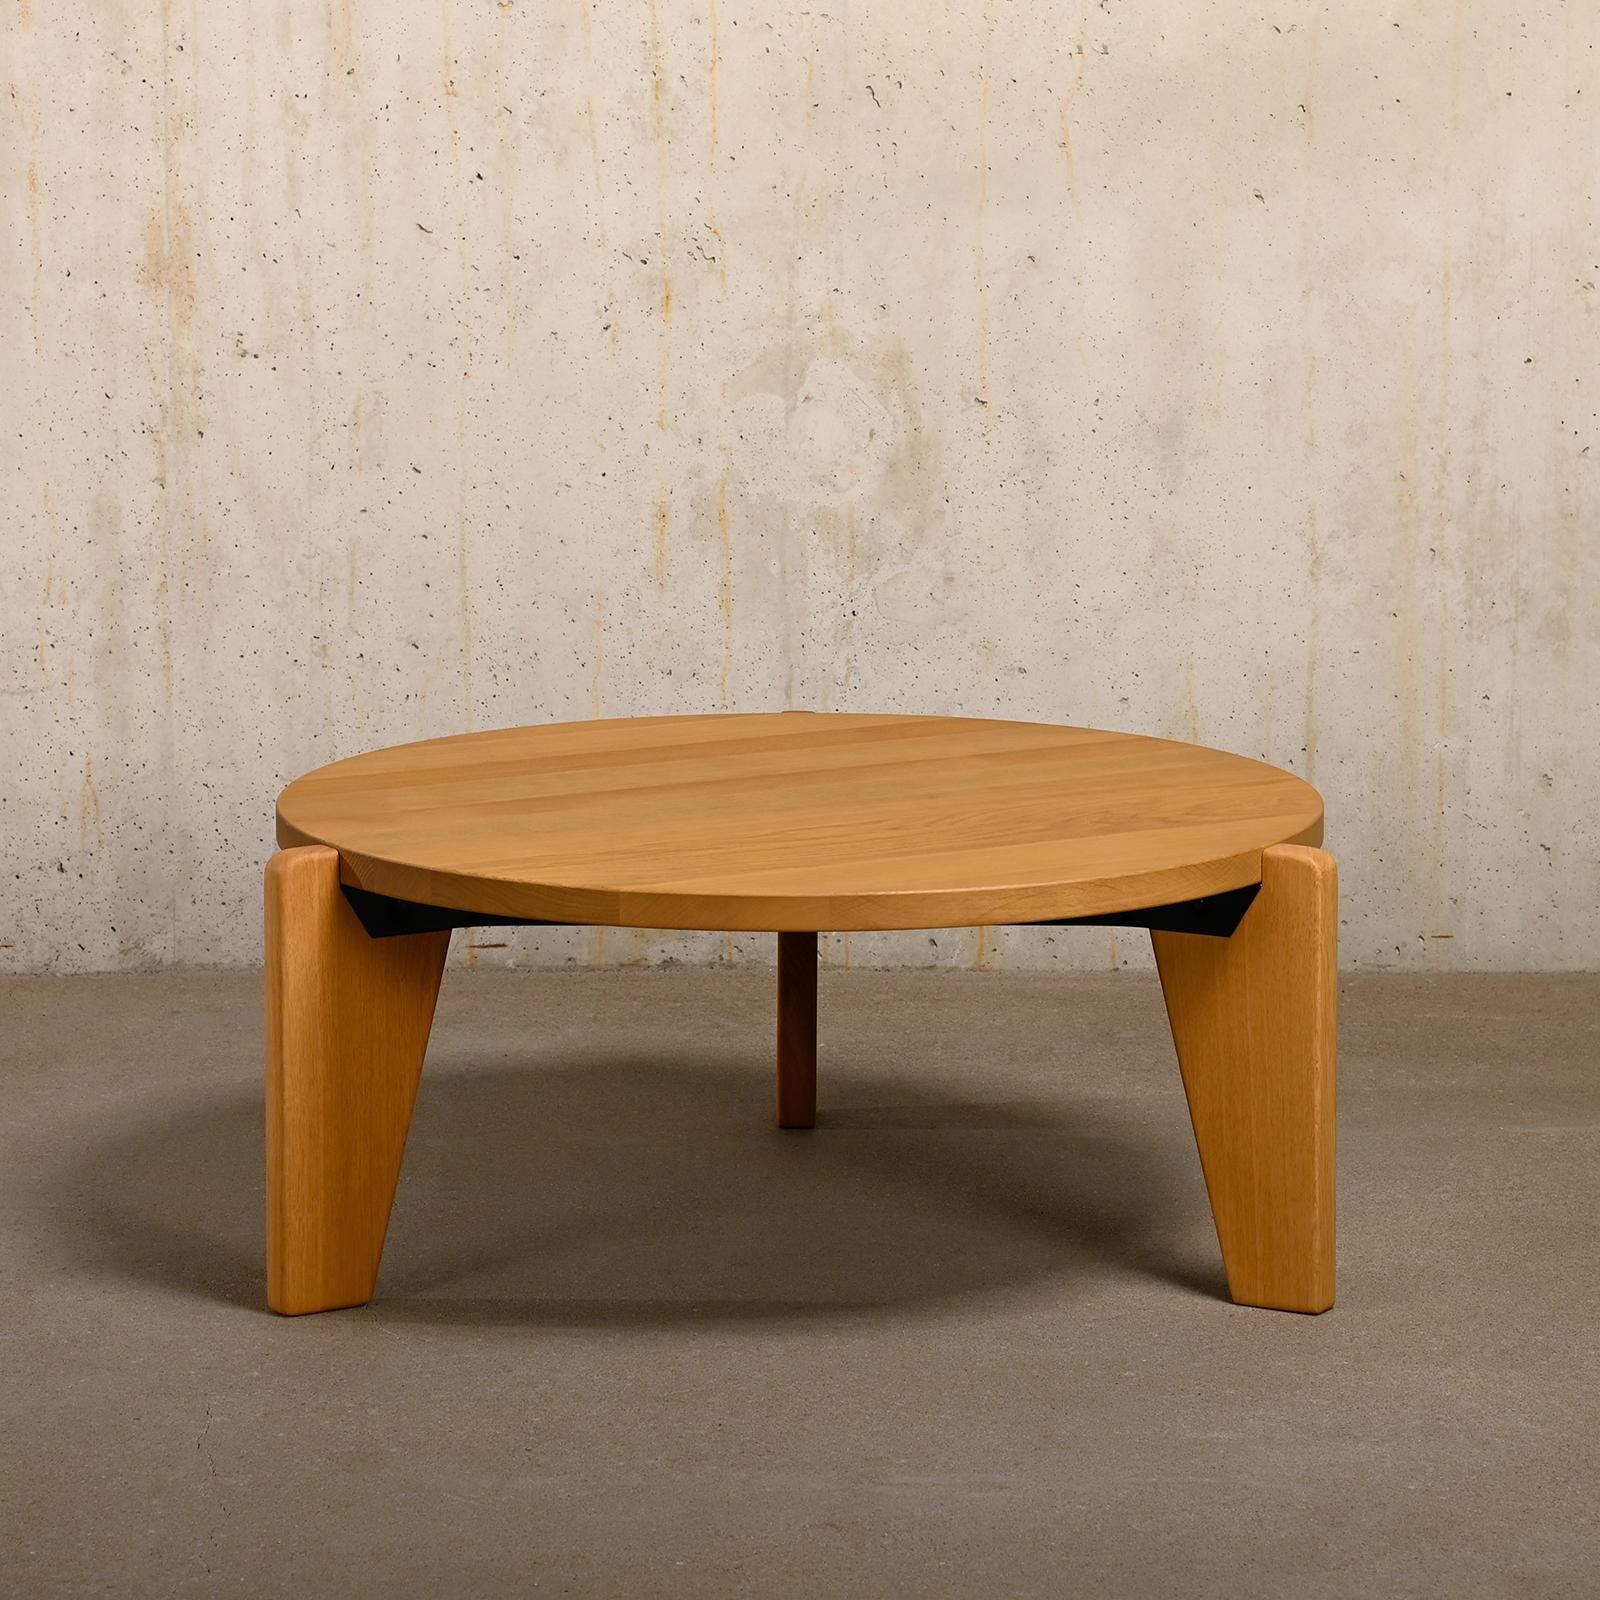 German Jean Prouvé Guéridon Bas Coffee Table in solid Oak for Vitra